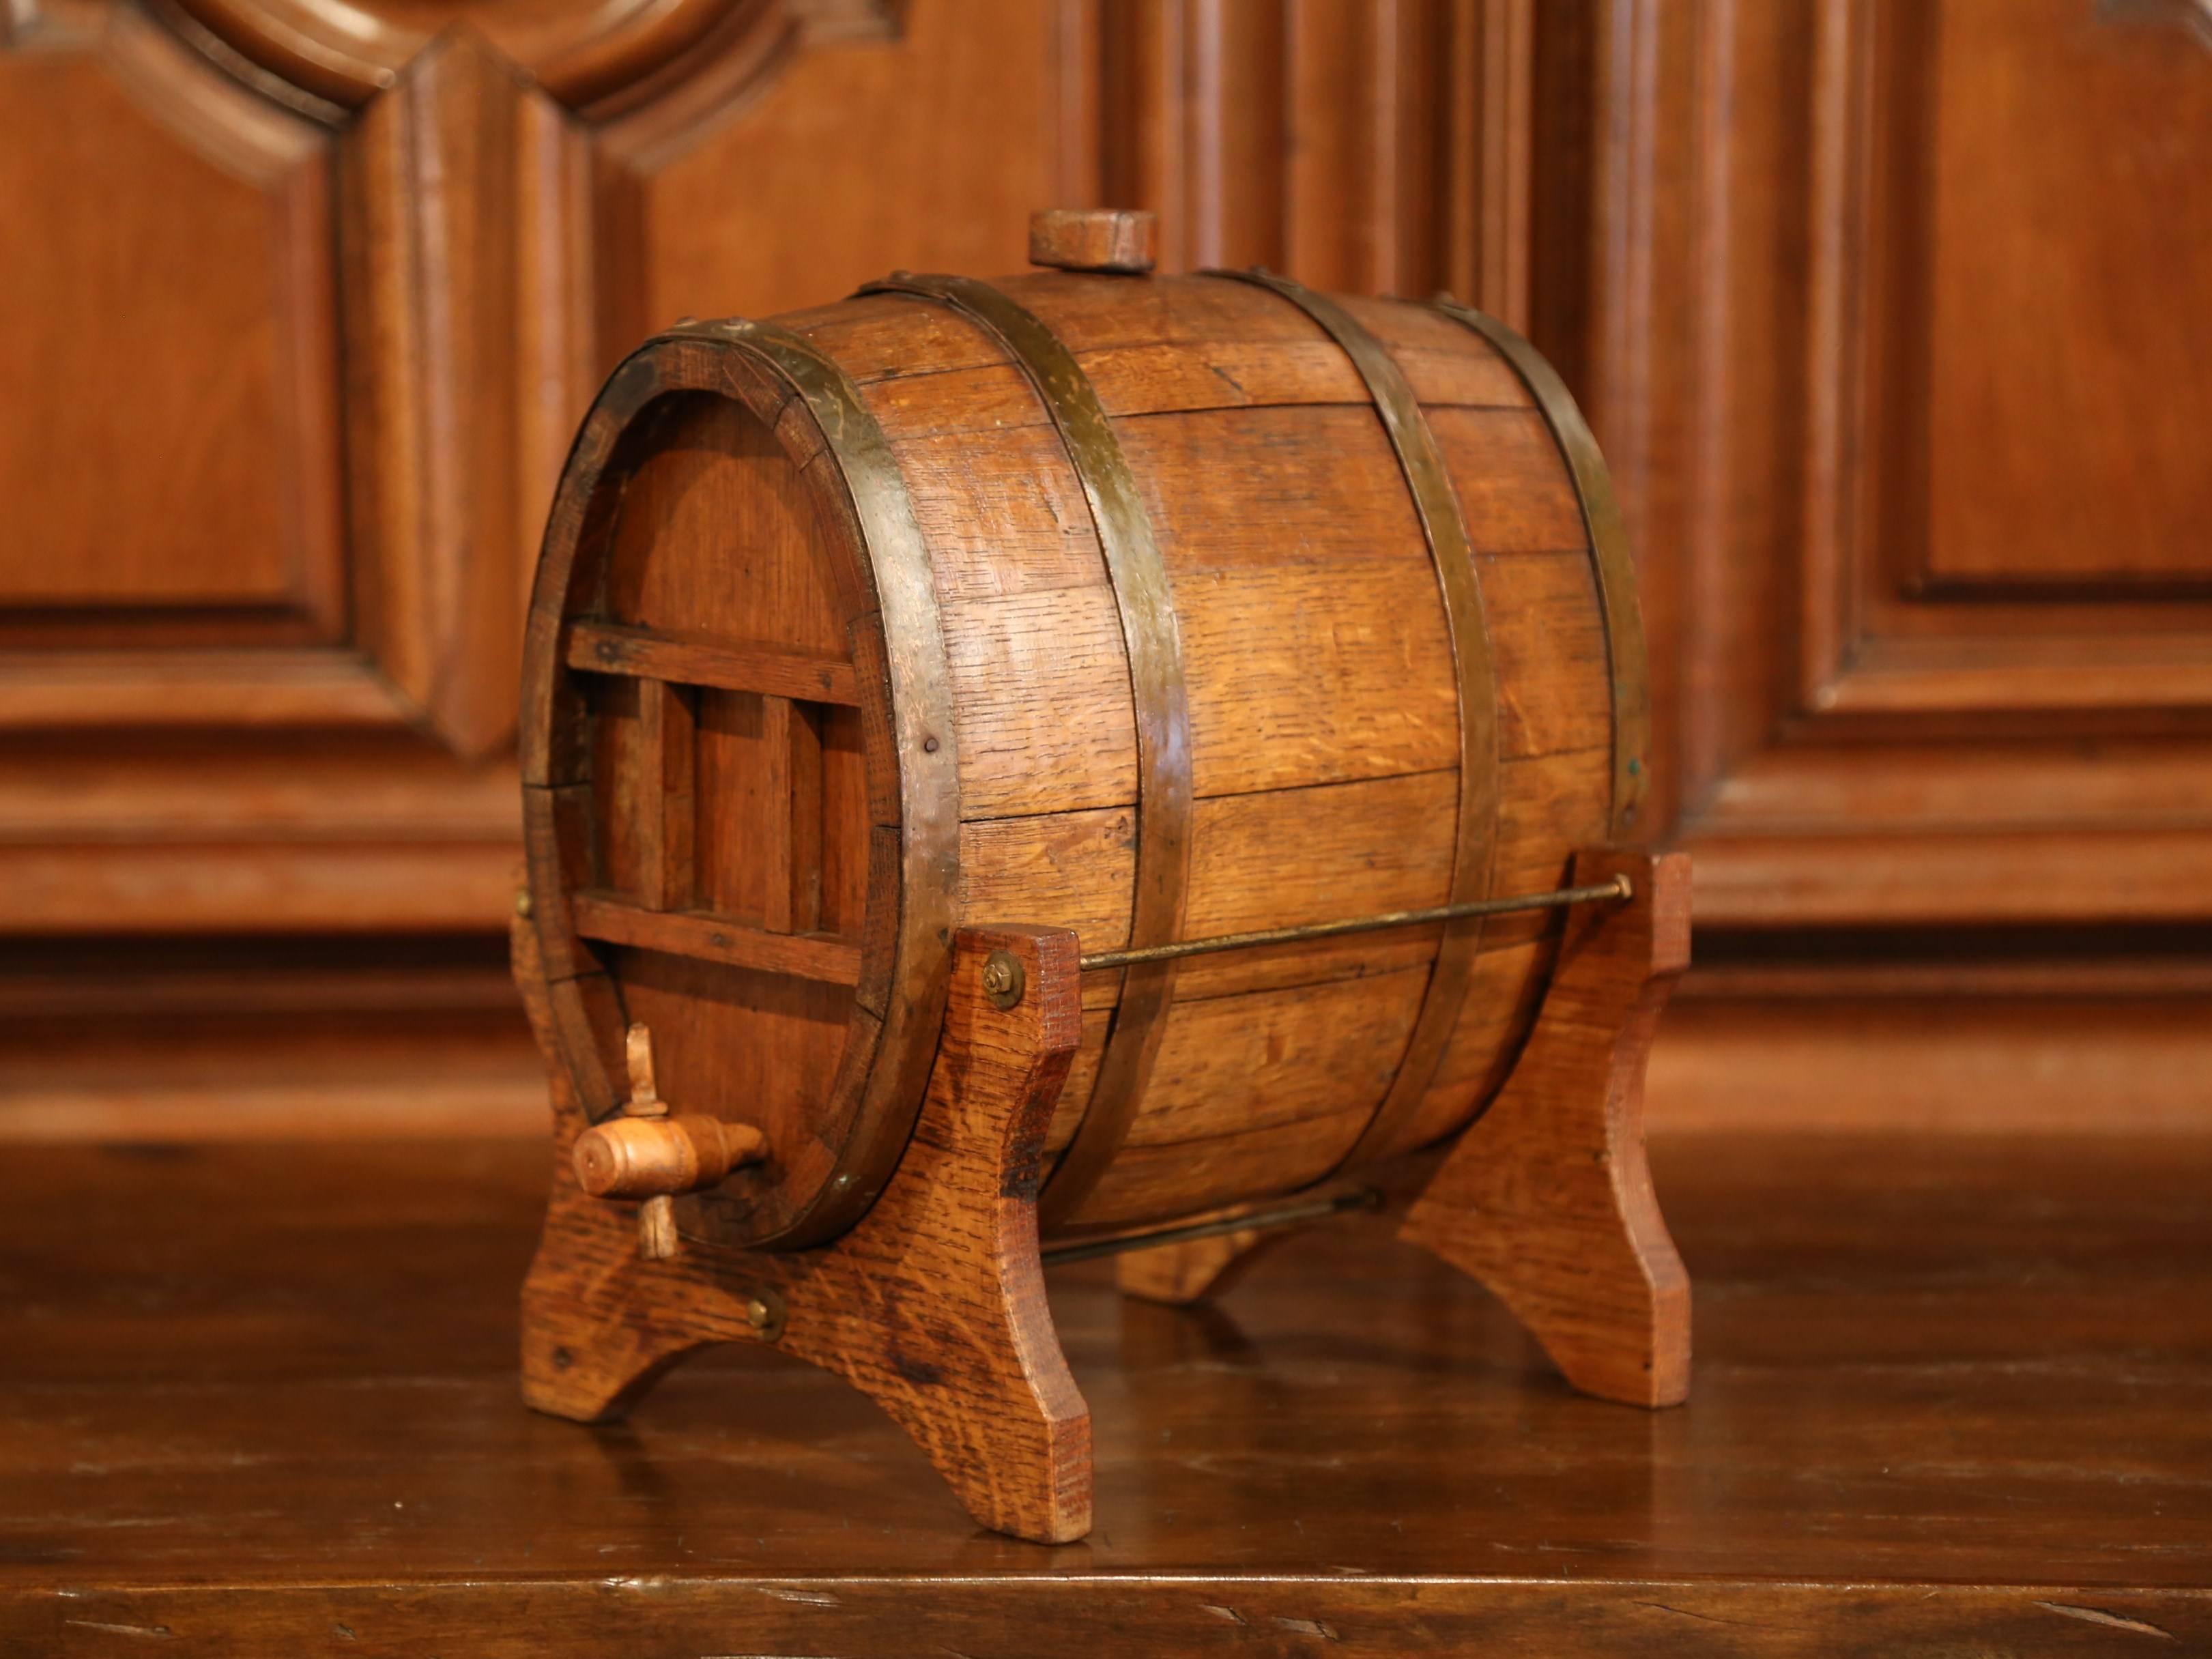 Accessorize your bar with this antique brandy barrel from Normandy; crafted circa 1880, this oval oak barrel embellished with metal rims was used in the days to hold Calvados for an after dinner drink. This one features the original wooden faucet